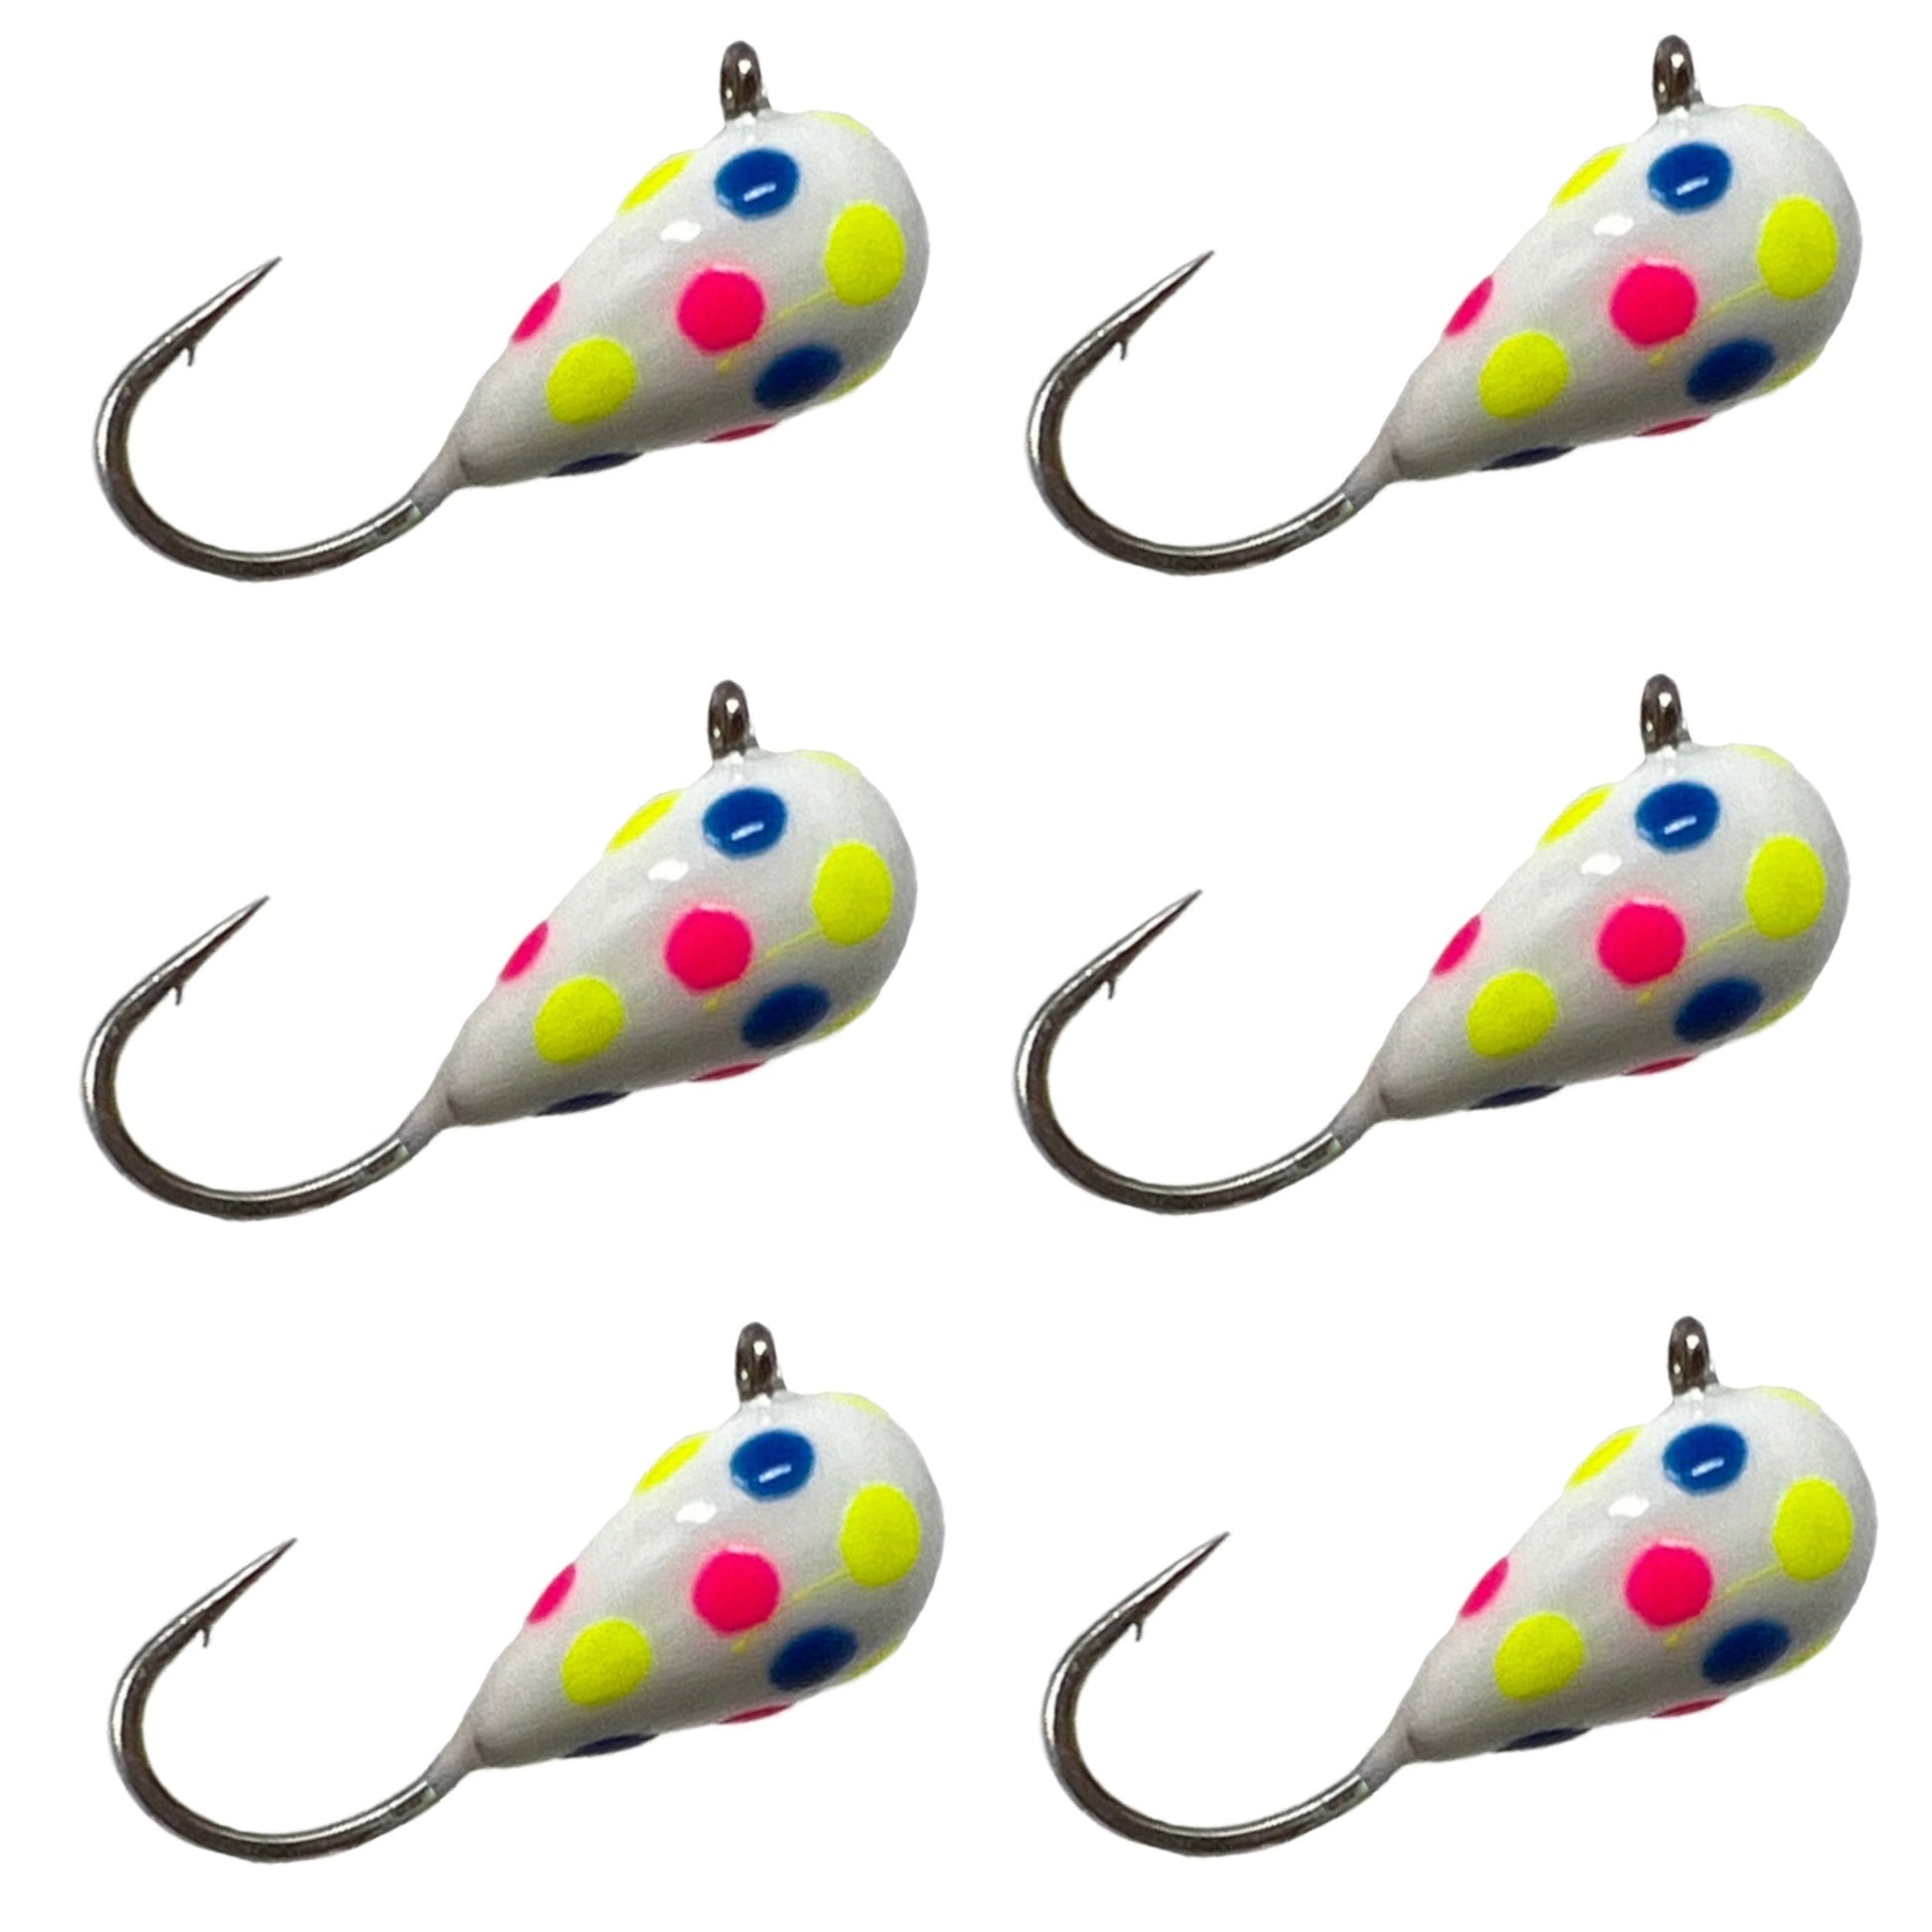 Tooth Shield Tackle UV Glow Tungsten Ice Fishing Jigs 5-Pack Crappie Perch  Bluegill Panfish Jig 5mm (Pink Shot) 